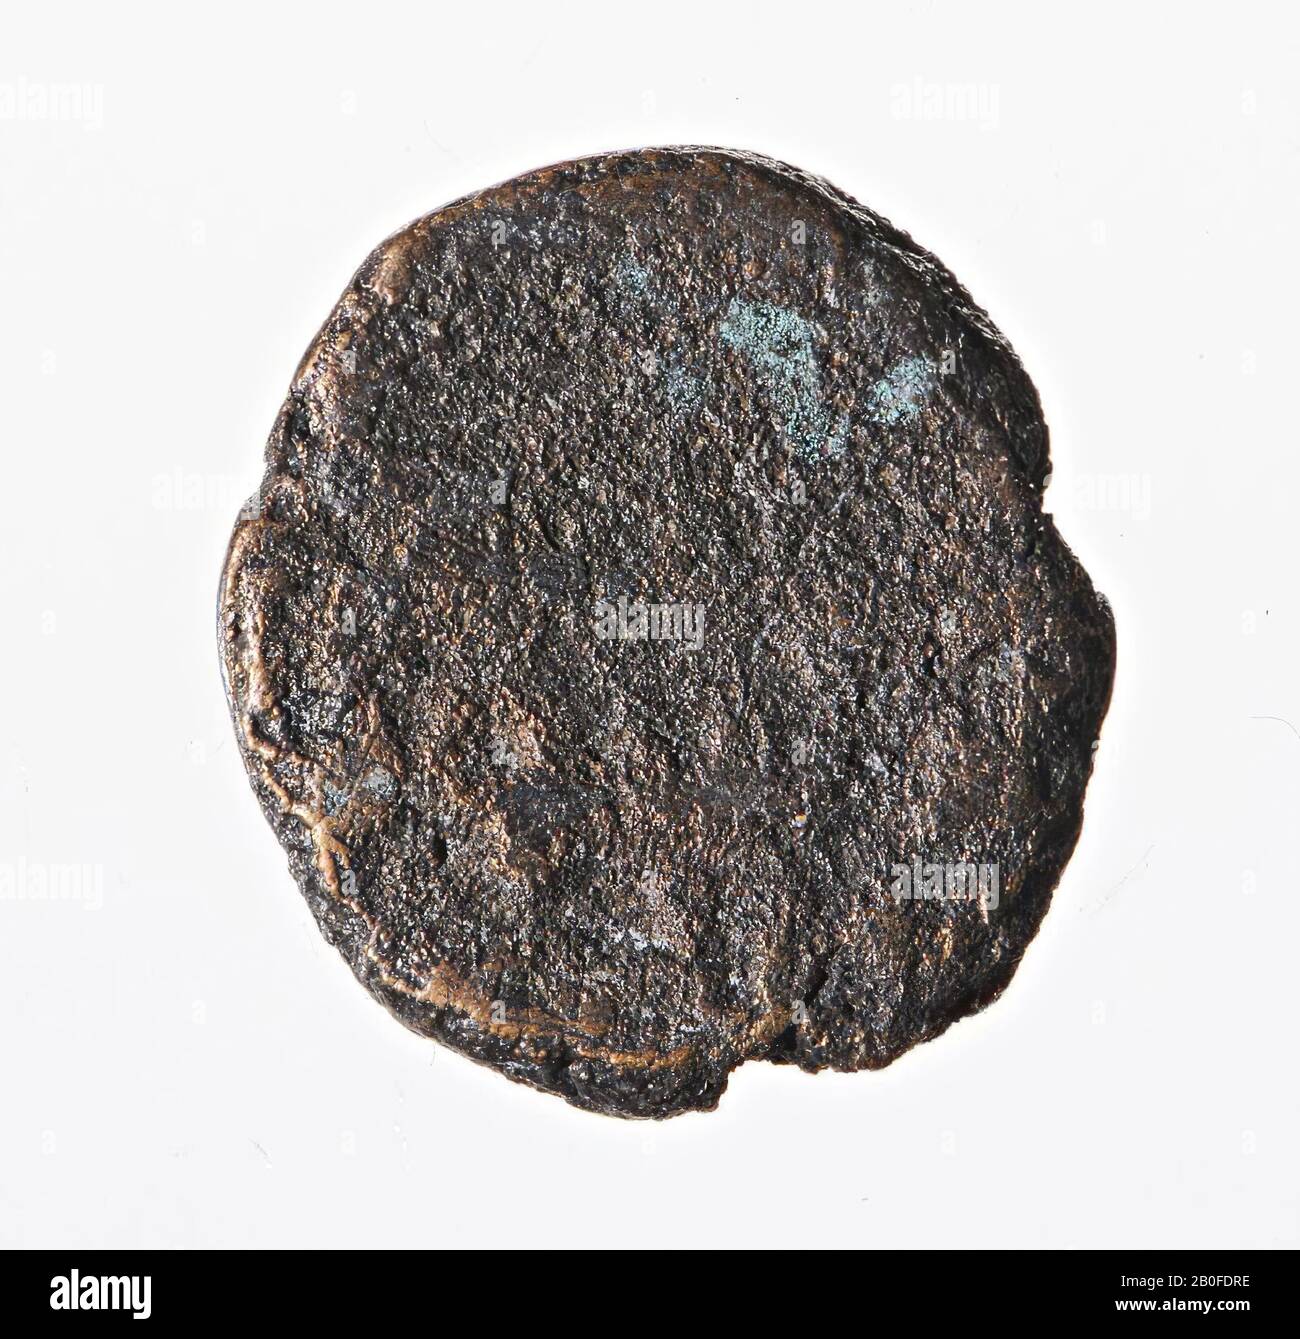 Arabic text on vz.and kz., Coin, aes, Arabic, metal, copper, Diam. 15 mm, wt. 3.37 gr, 611-1000 AD, unknown, unknown, unknown, unknown Stock Photo